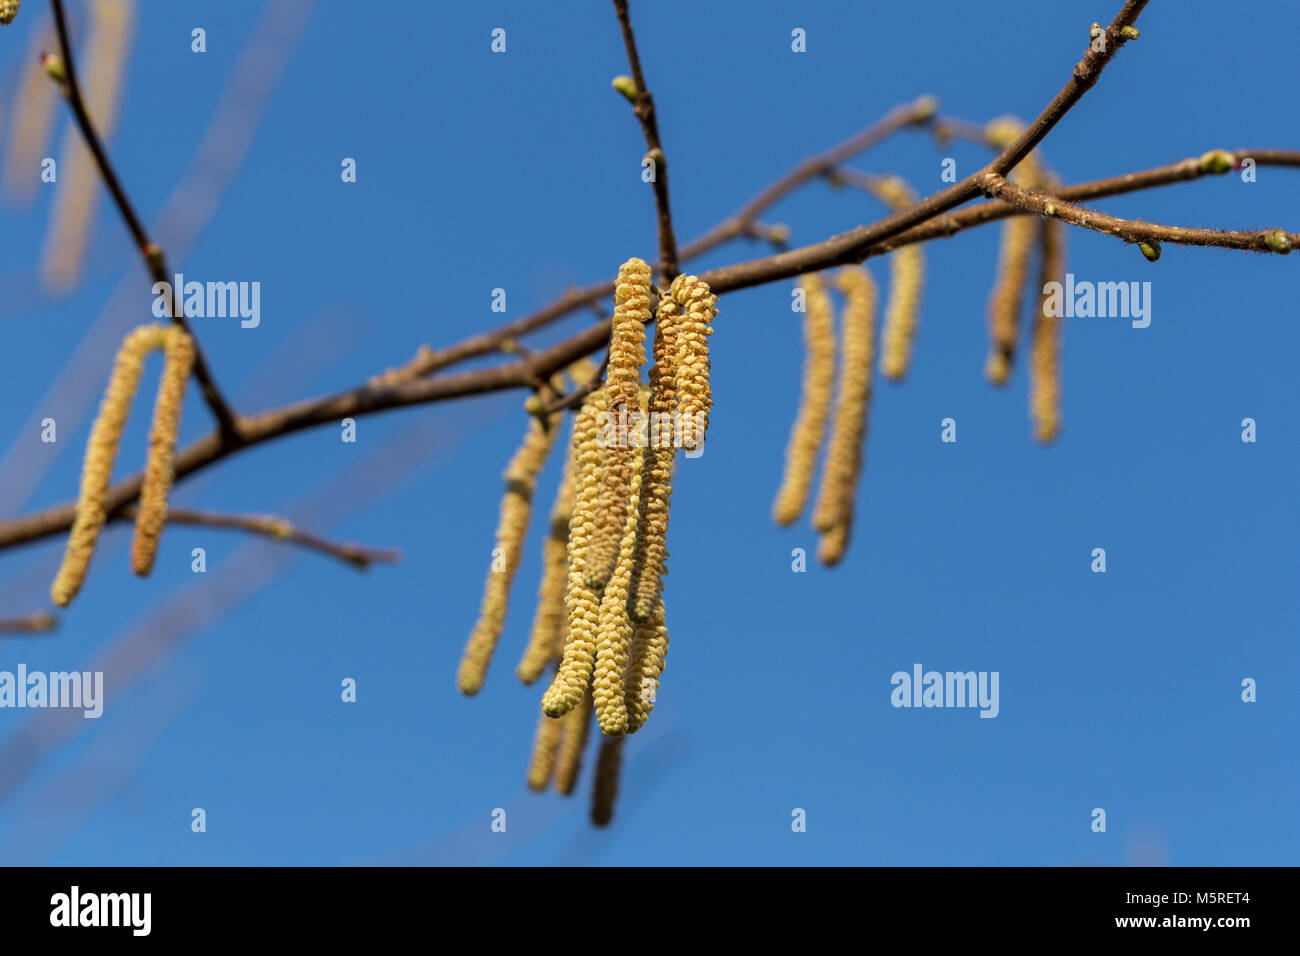 The long feathery male catkins of the Hazel tree against a clear blue sky Stock Photo